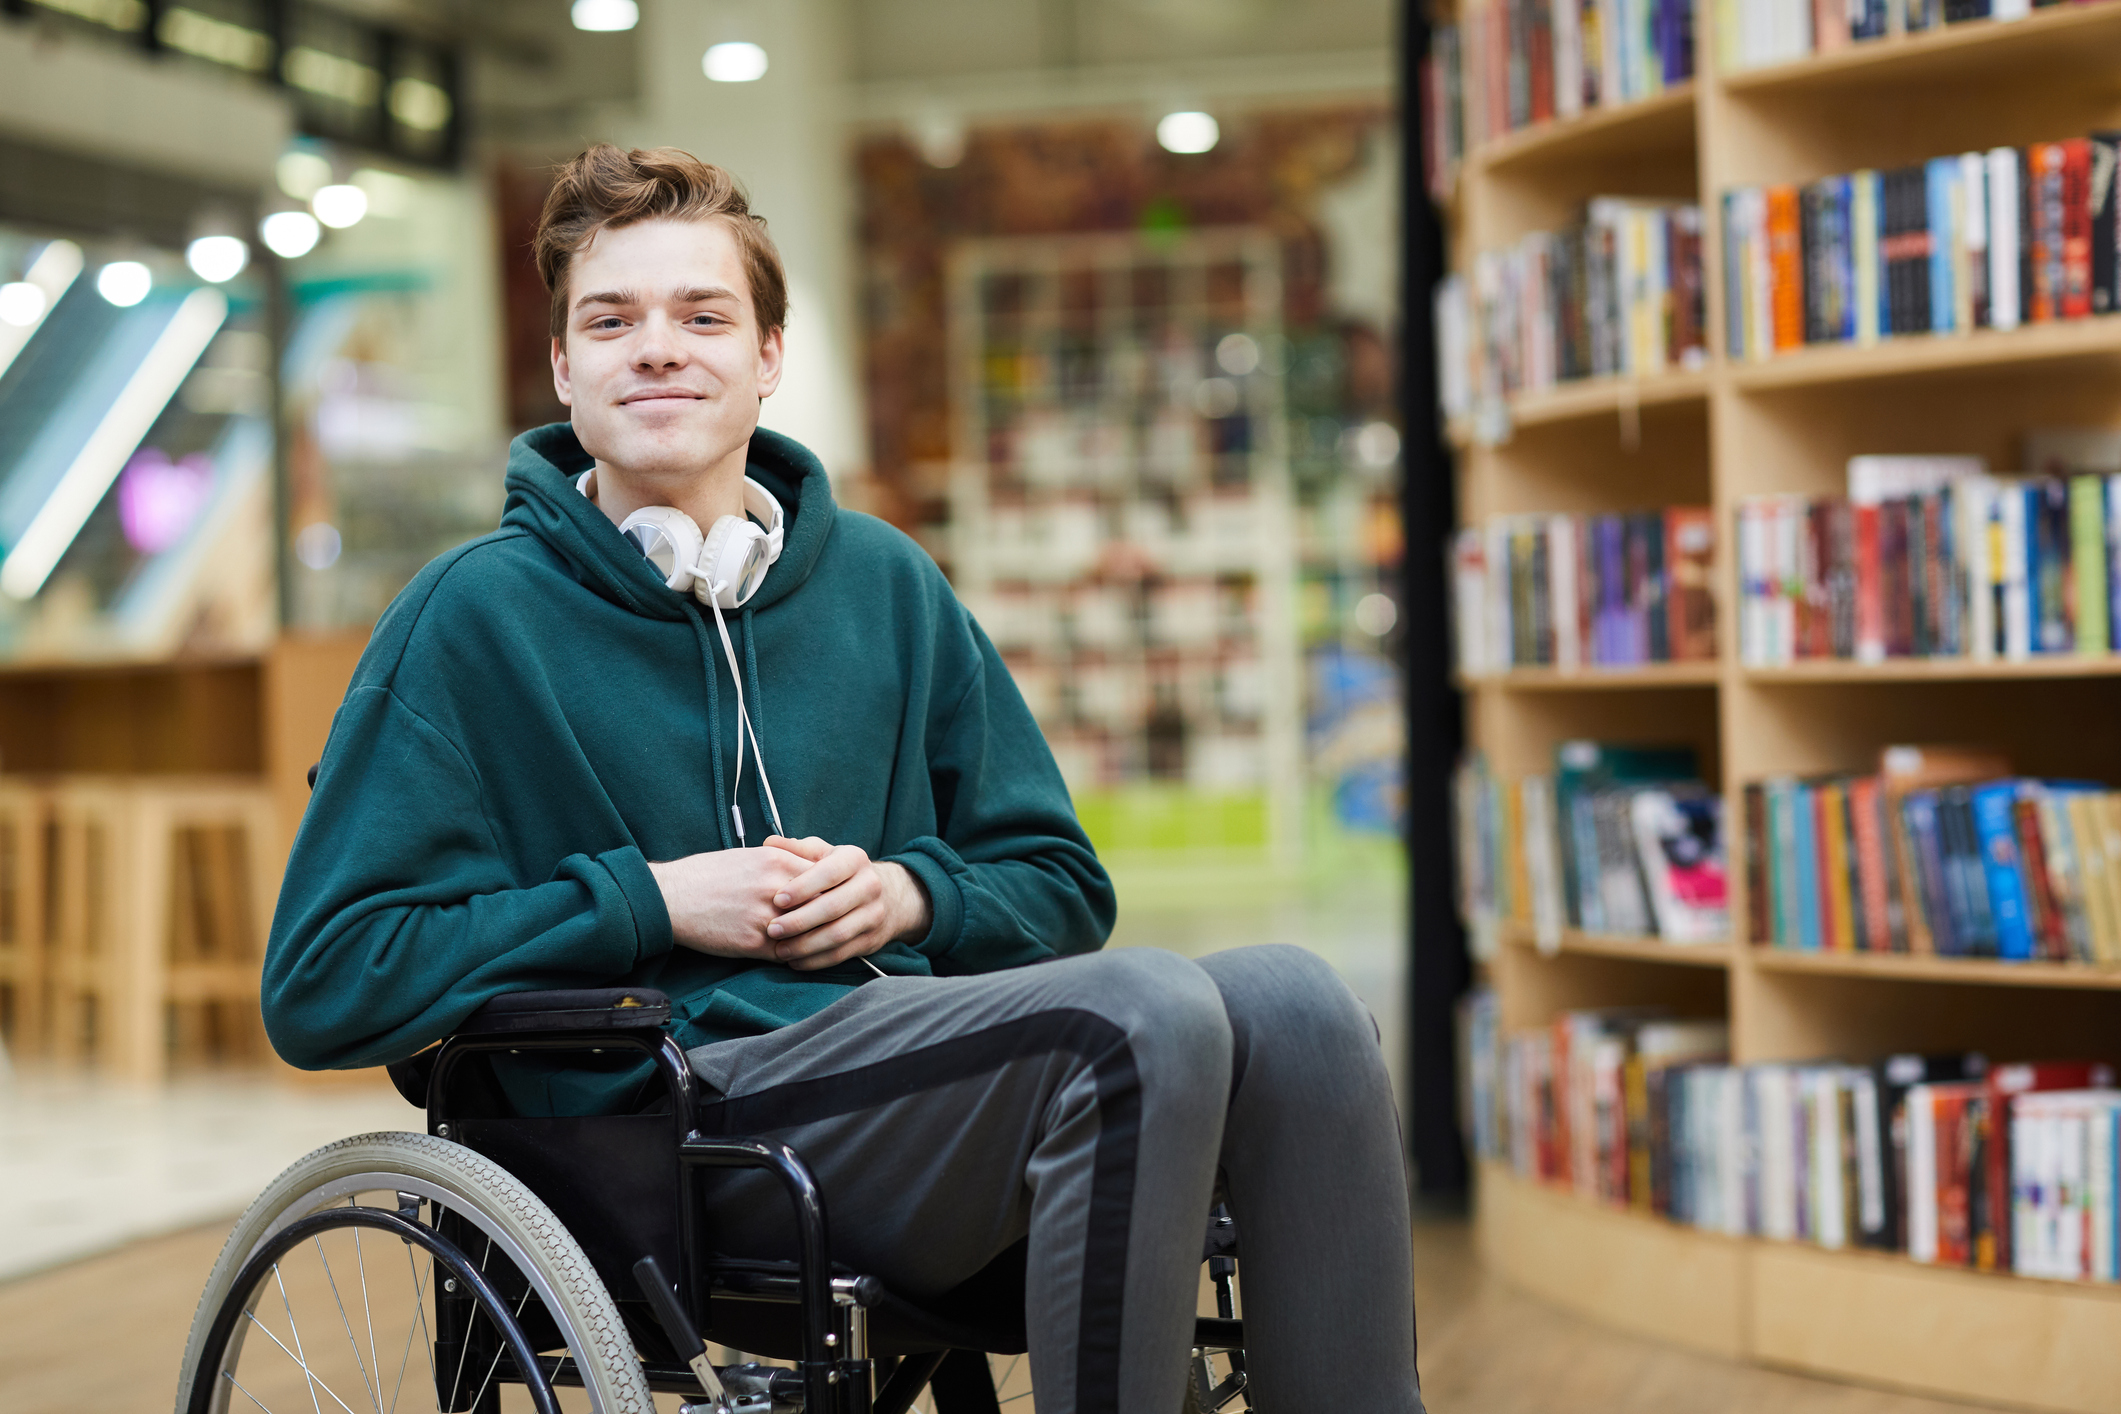 Image of a young man in a wheel chair with a library bookcase behind him.